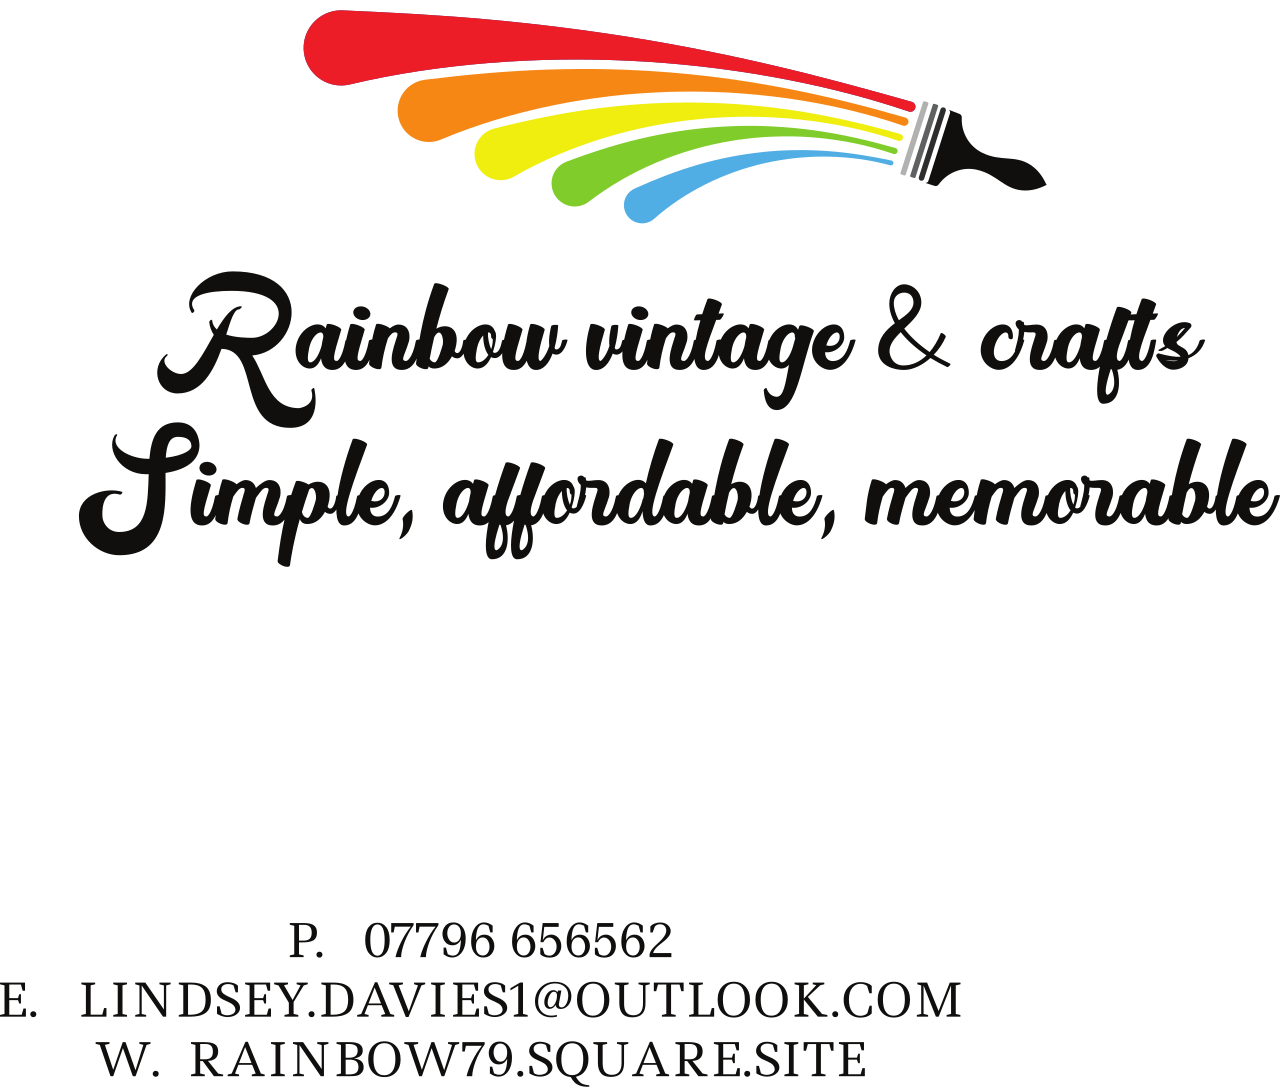 Rainbow vintage & crafts
Simple, affordable, memorable
's web page